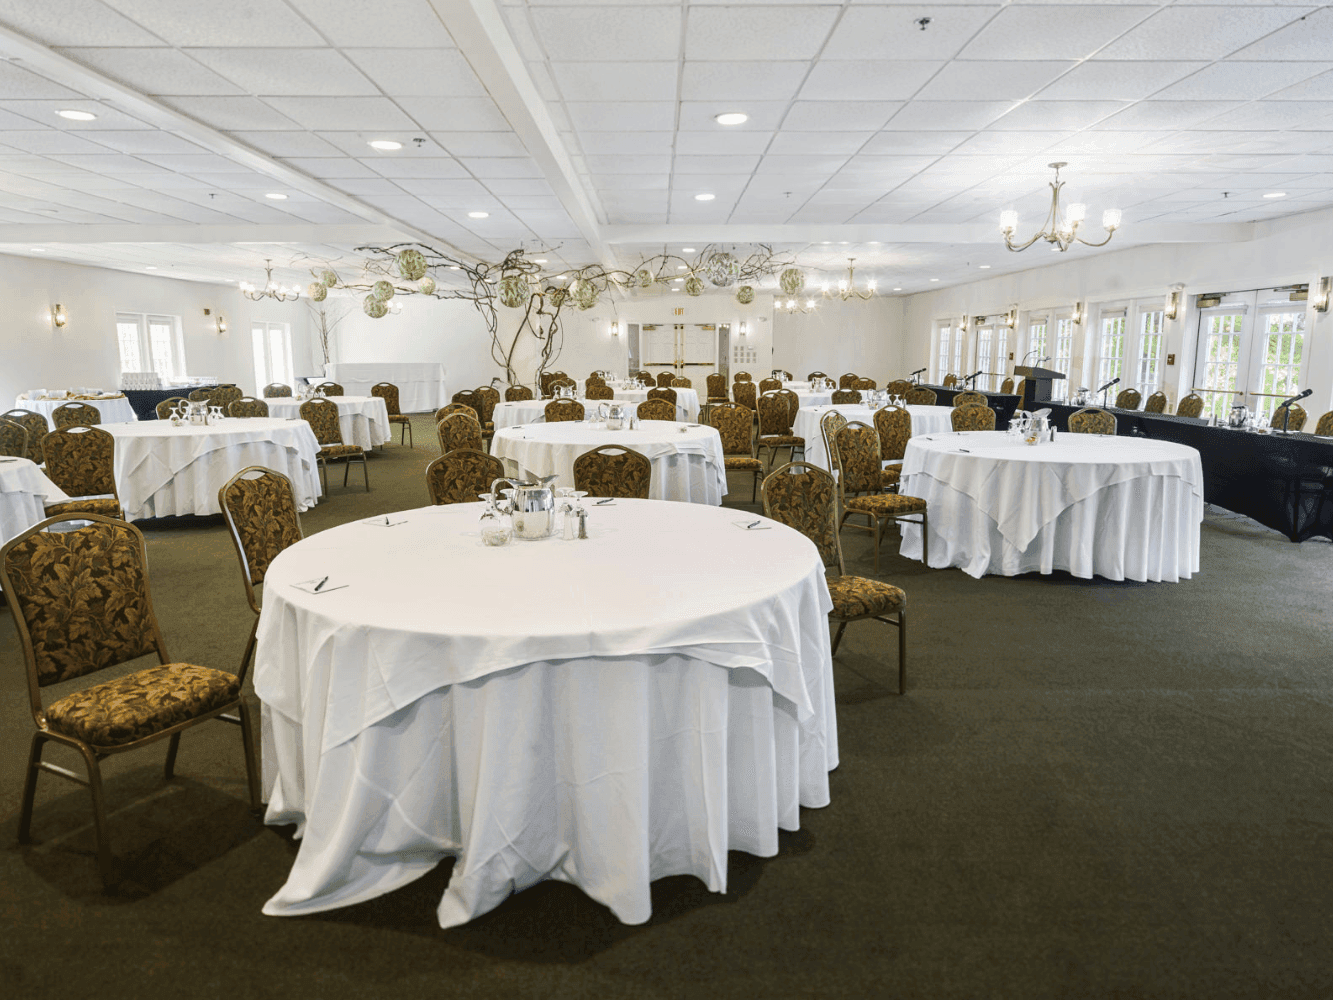 Banquet tables arranged in Casco Bay Room with carpeted floors at Harraseeket Inn